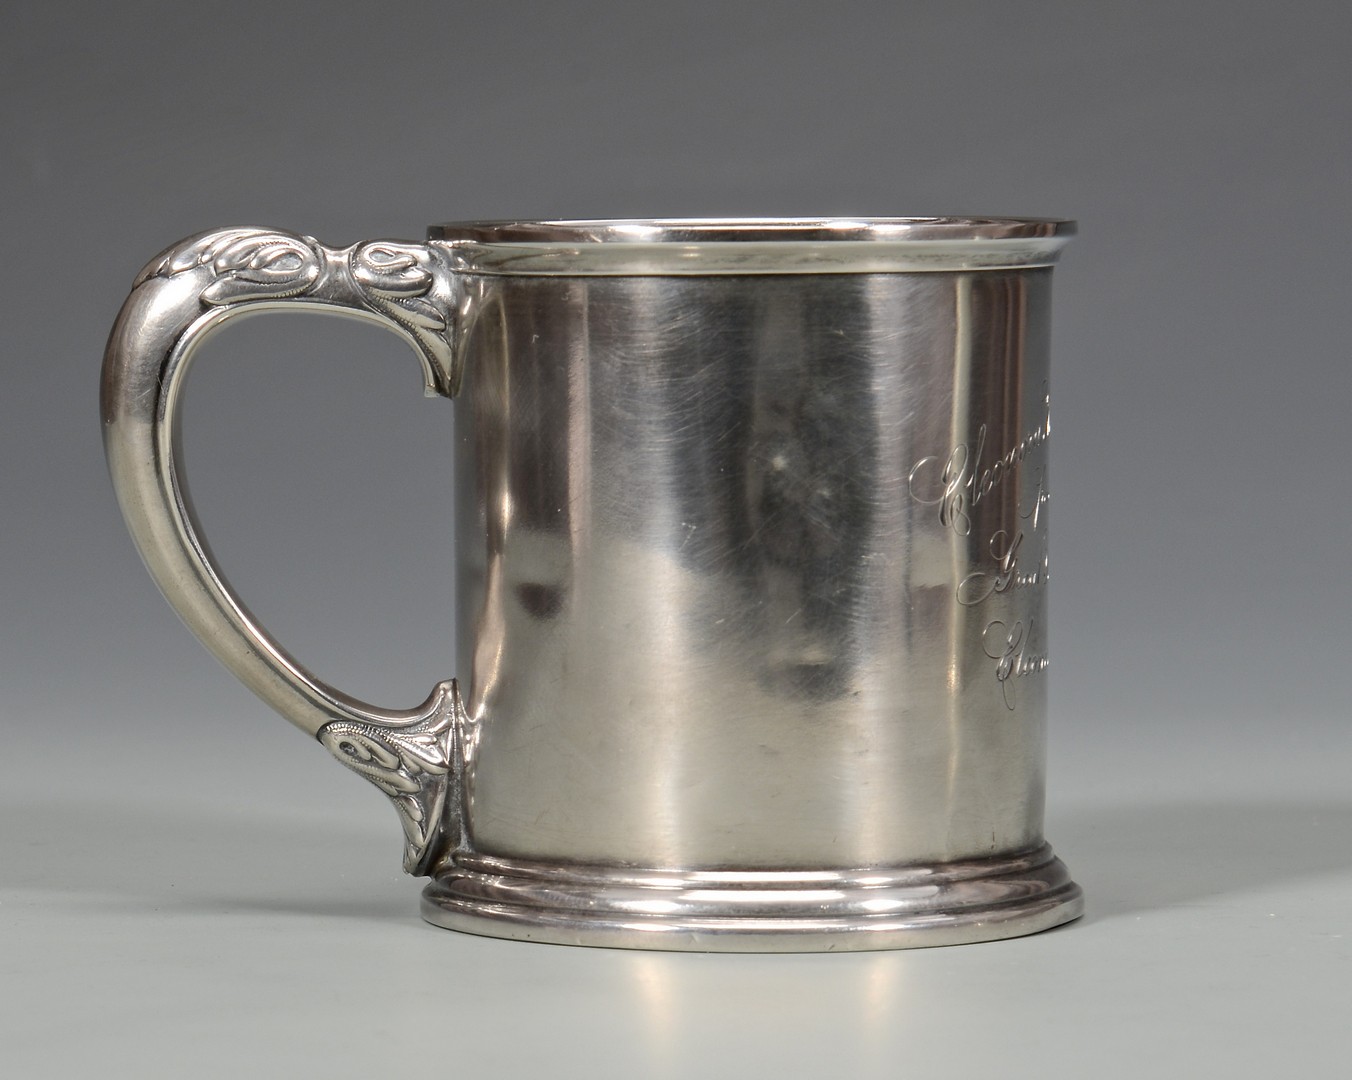 Lot 825: Group of 3 Sterling Silver Cups